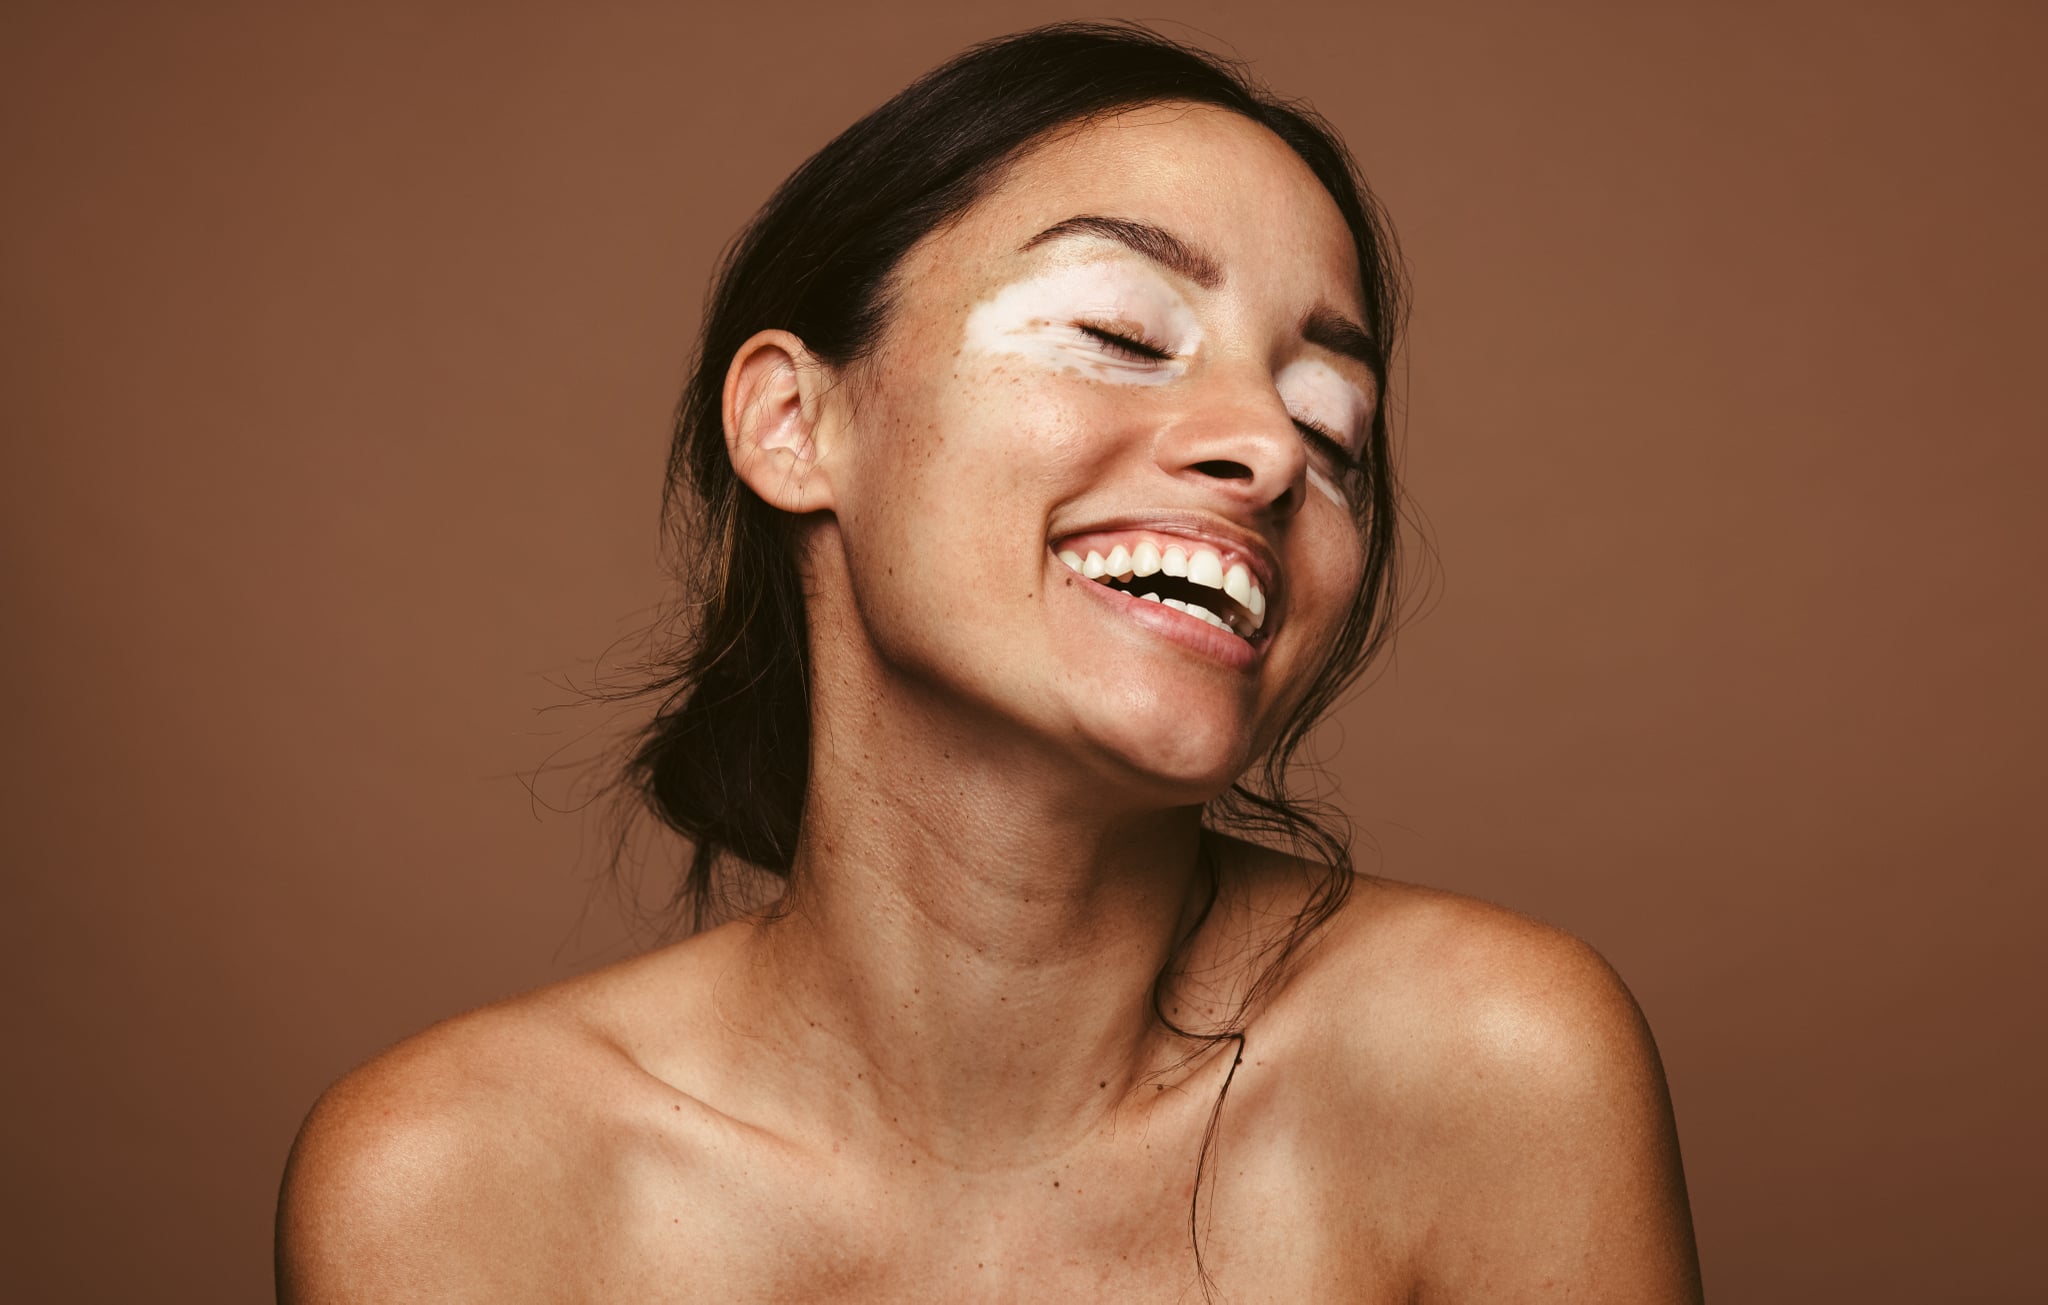 Portrait of a smiling young woman with vitiligo. Close up of woman with skin disorder smiling with eyes closed against brown background.